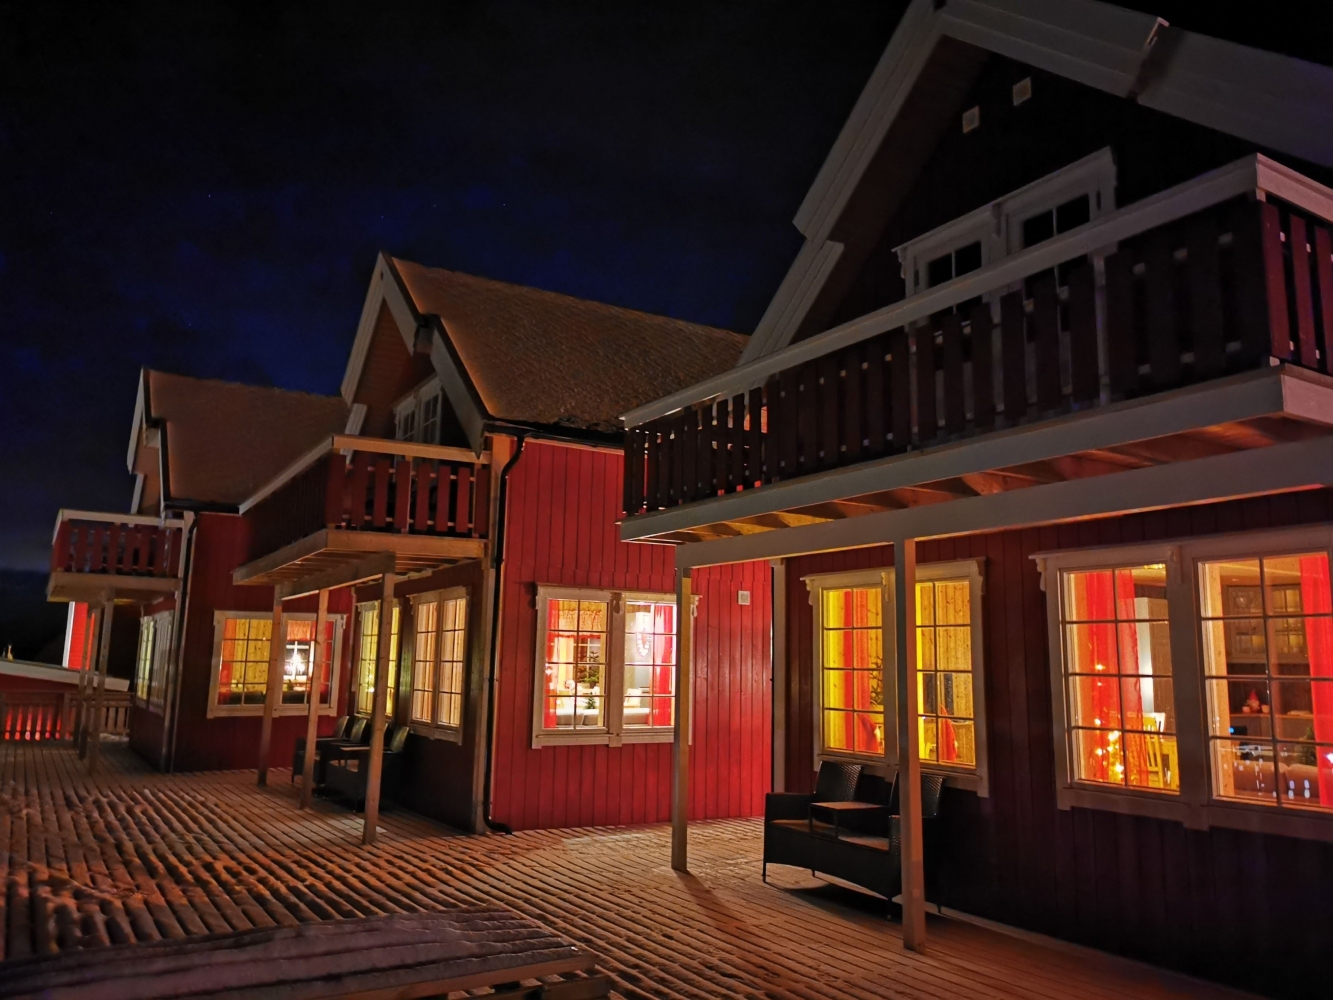 the cabins during winter in night time